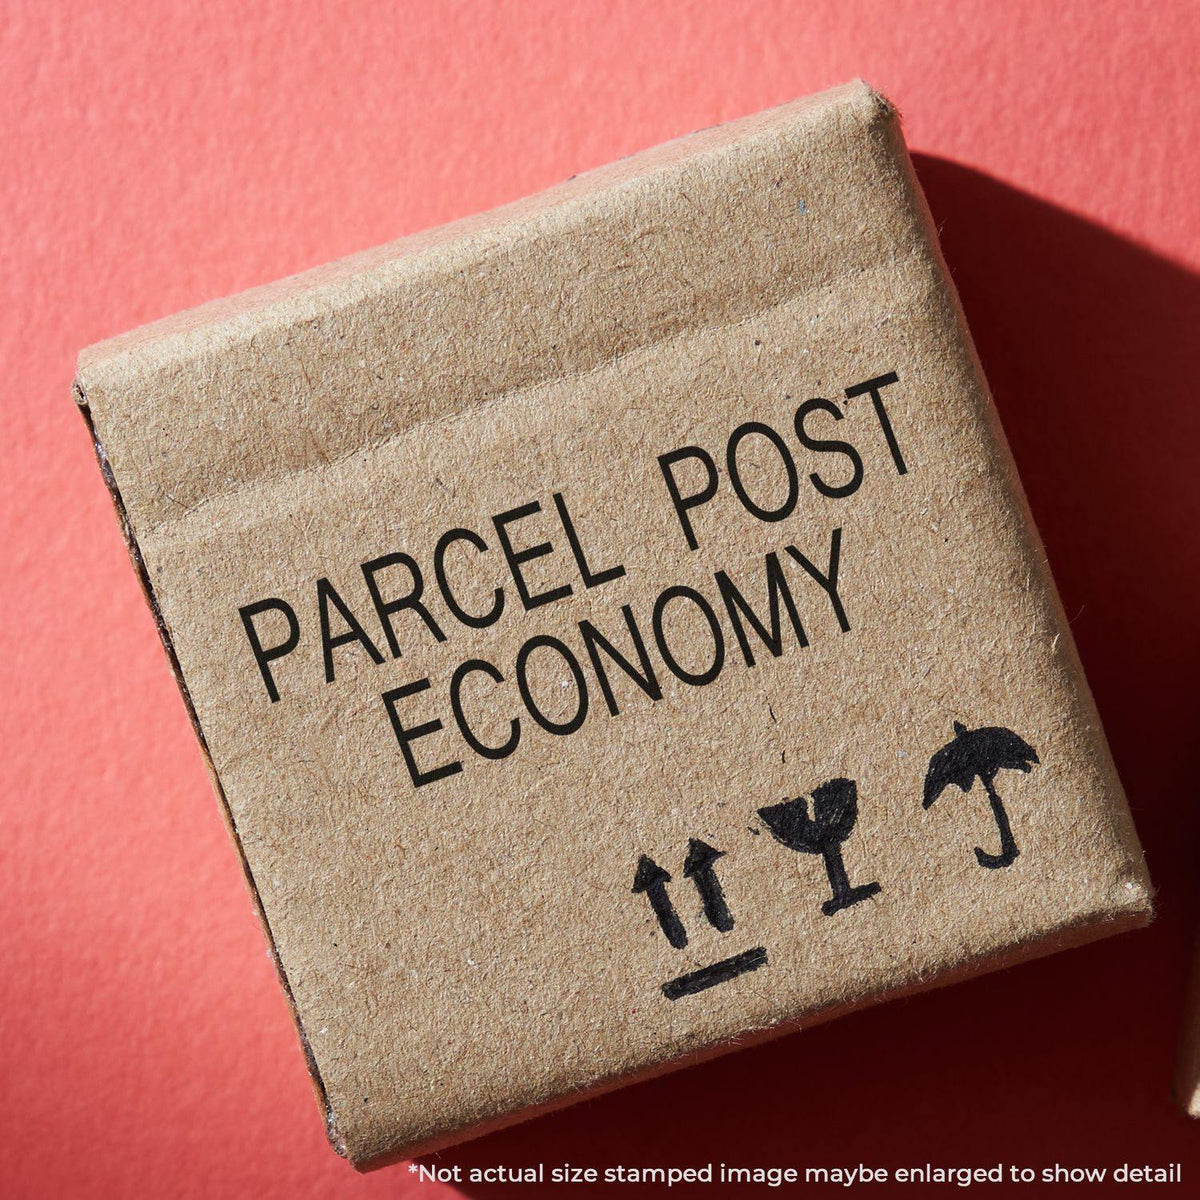 Large Parcel Post Economy Rubber Stamp In Use Photo